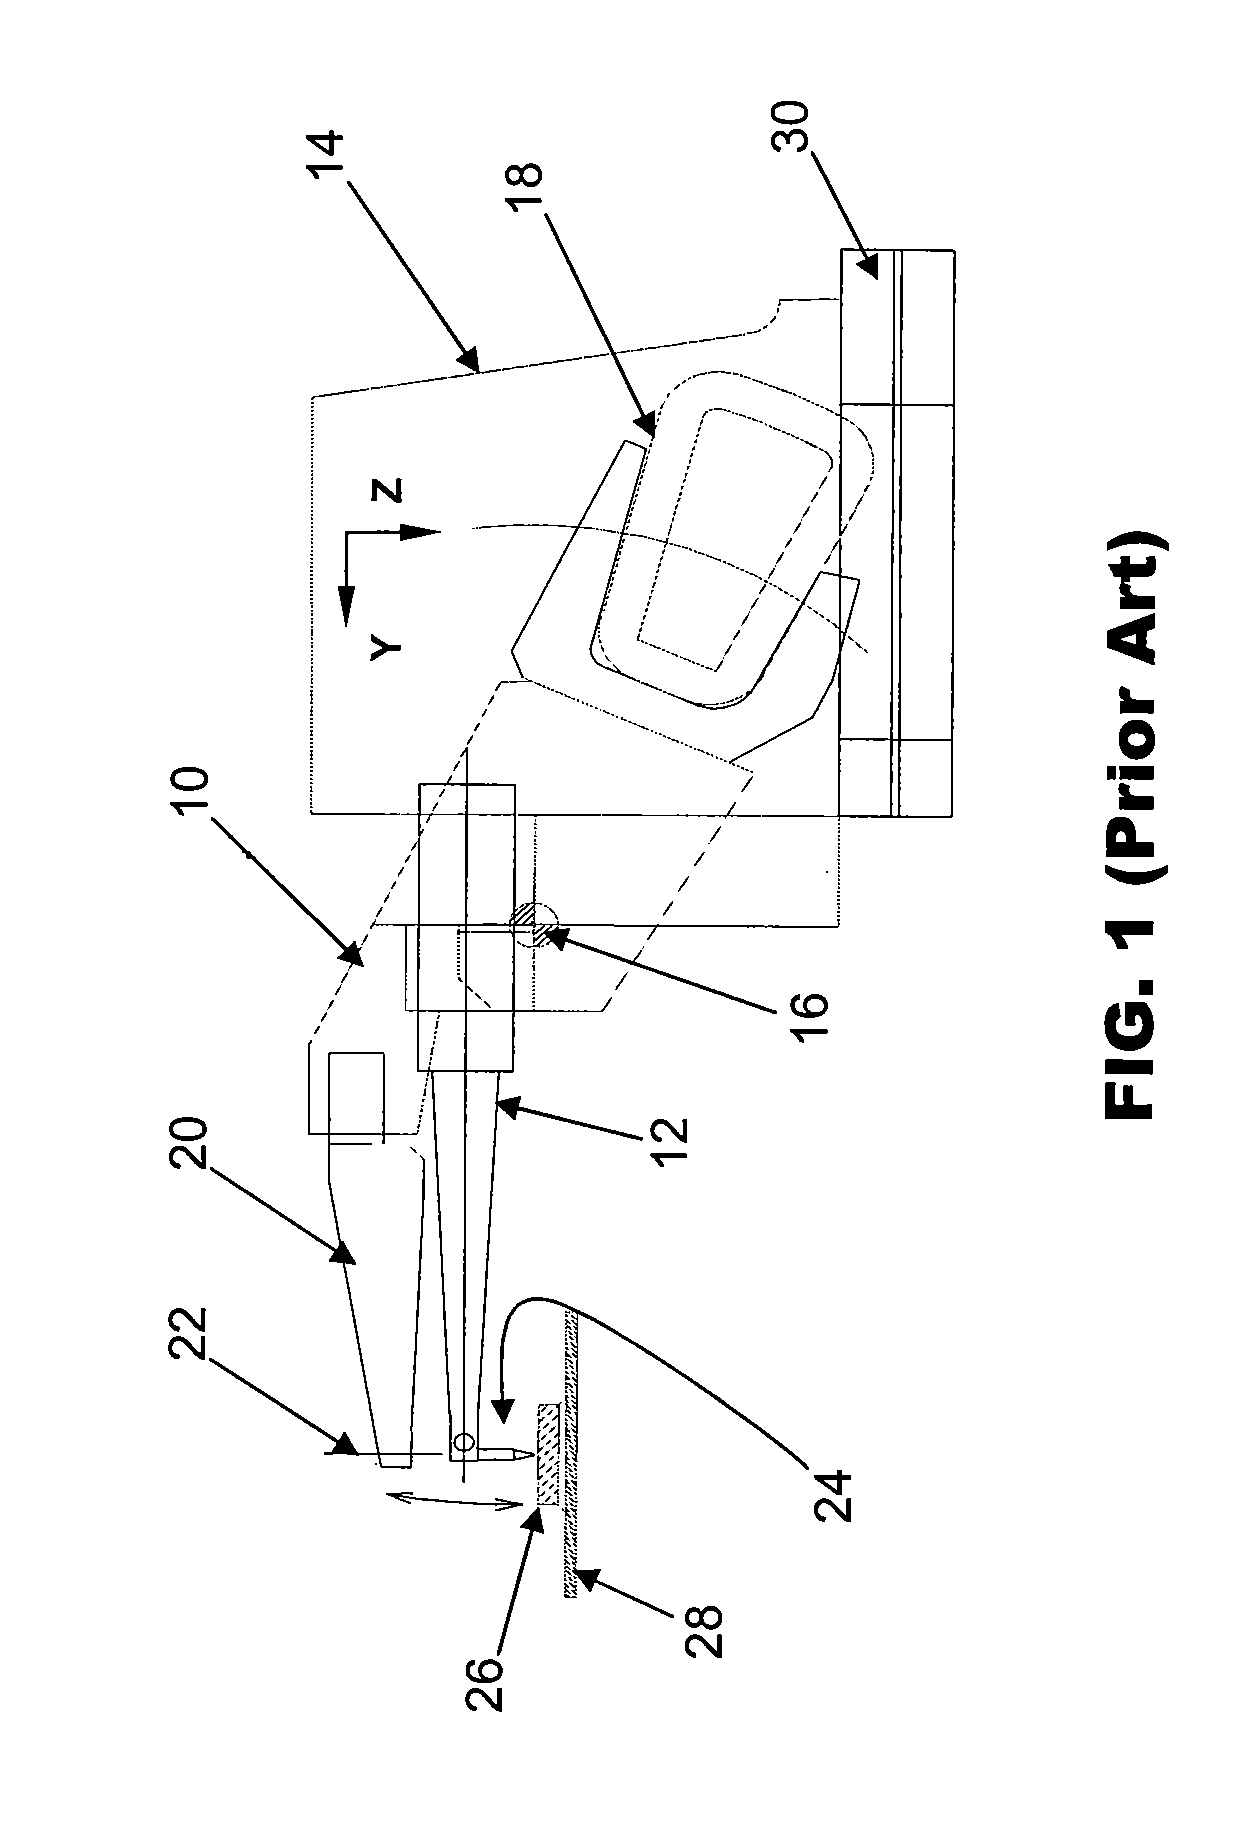 Wire bonding apparatus comprising rotary positioning stage